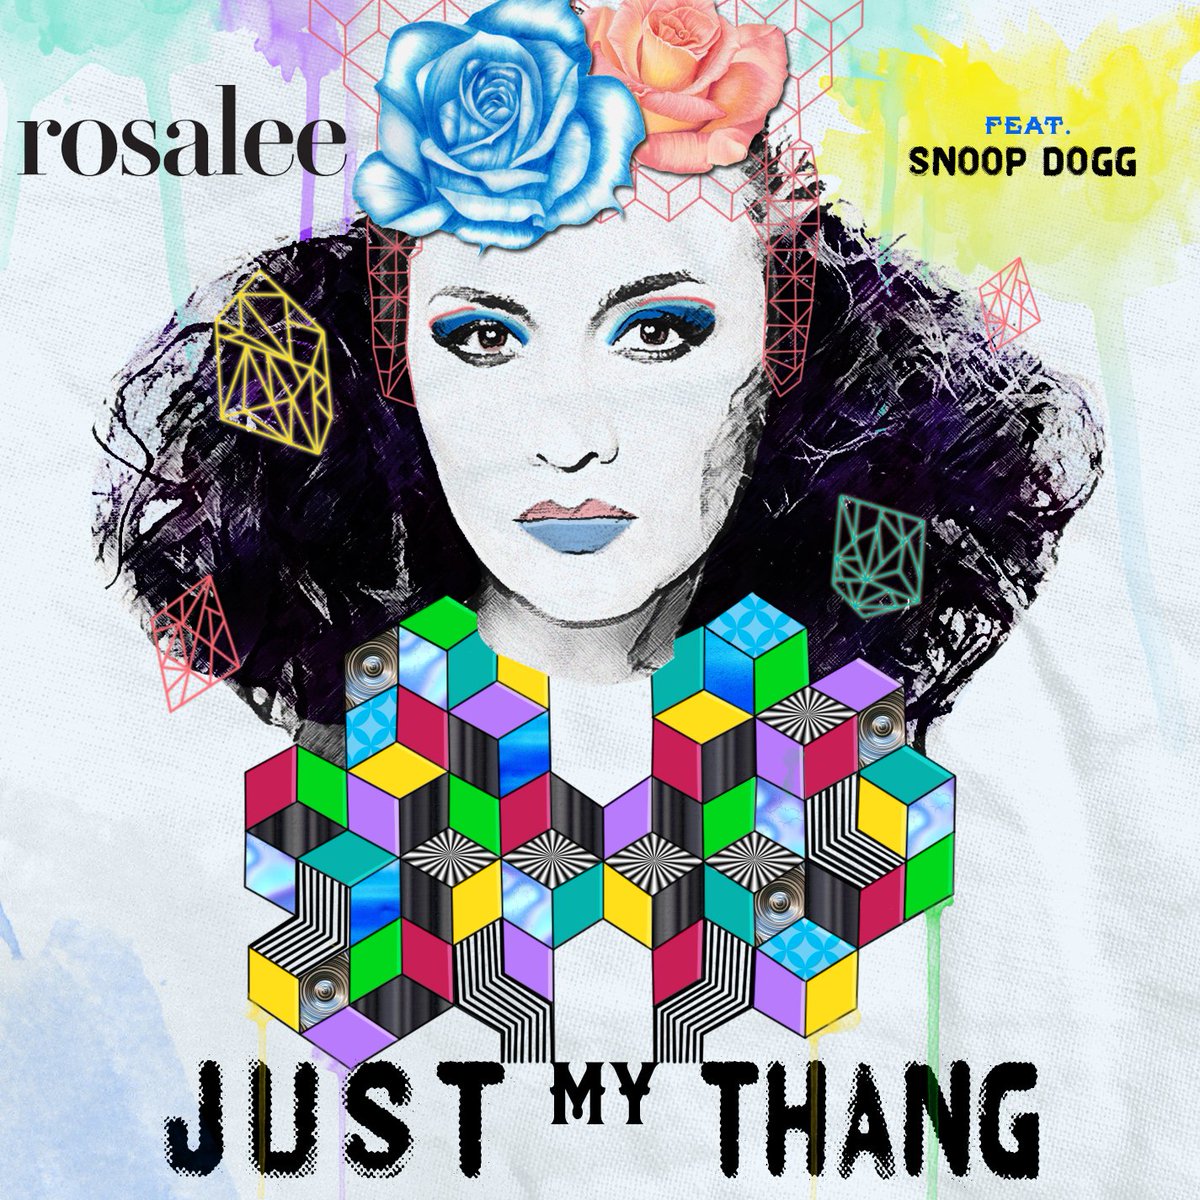 s/o to @rosaleemusic 4 the world premiere of just my thang !!

https://t.co/uOdPCDKHeA https://t.co/0q0pzujWD6